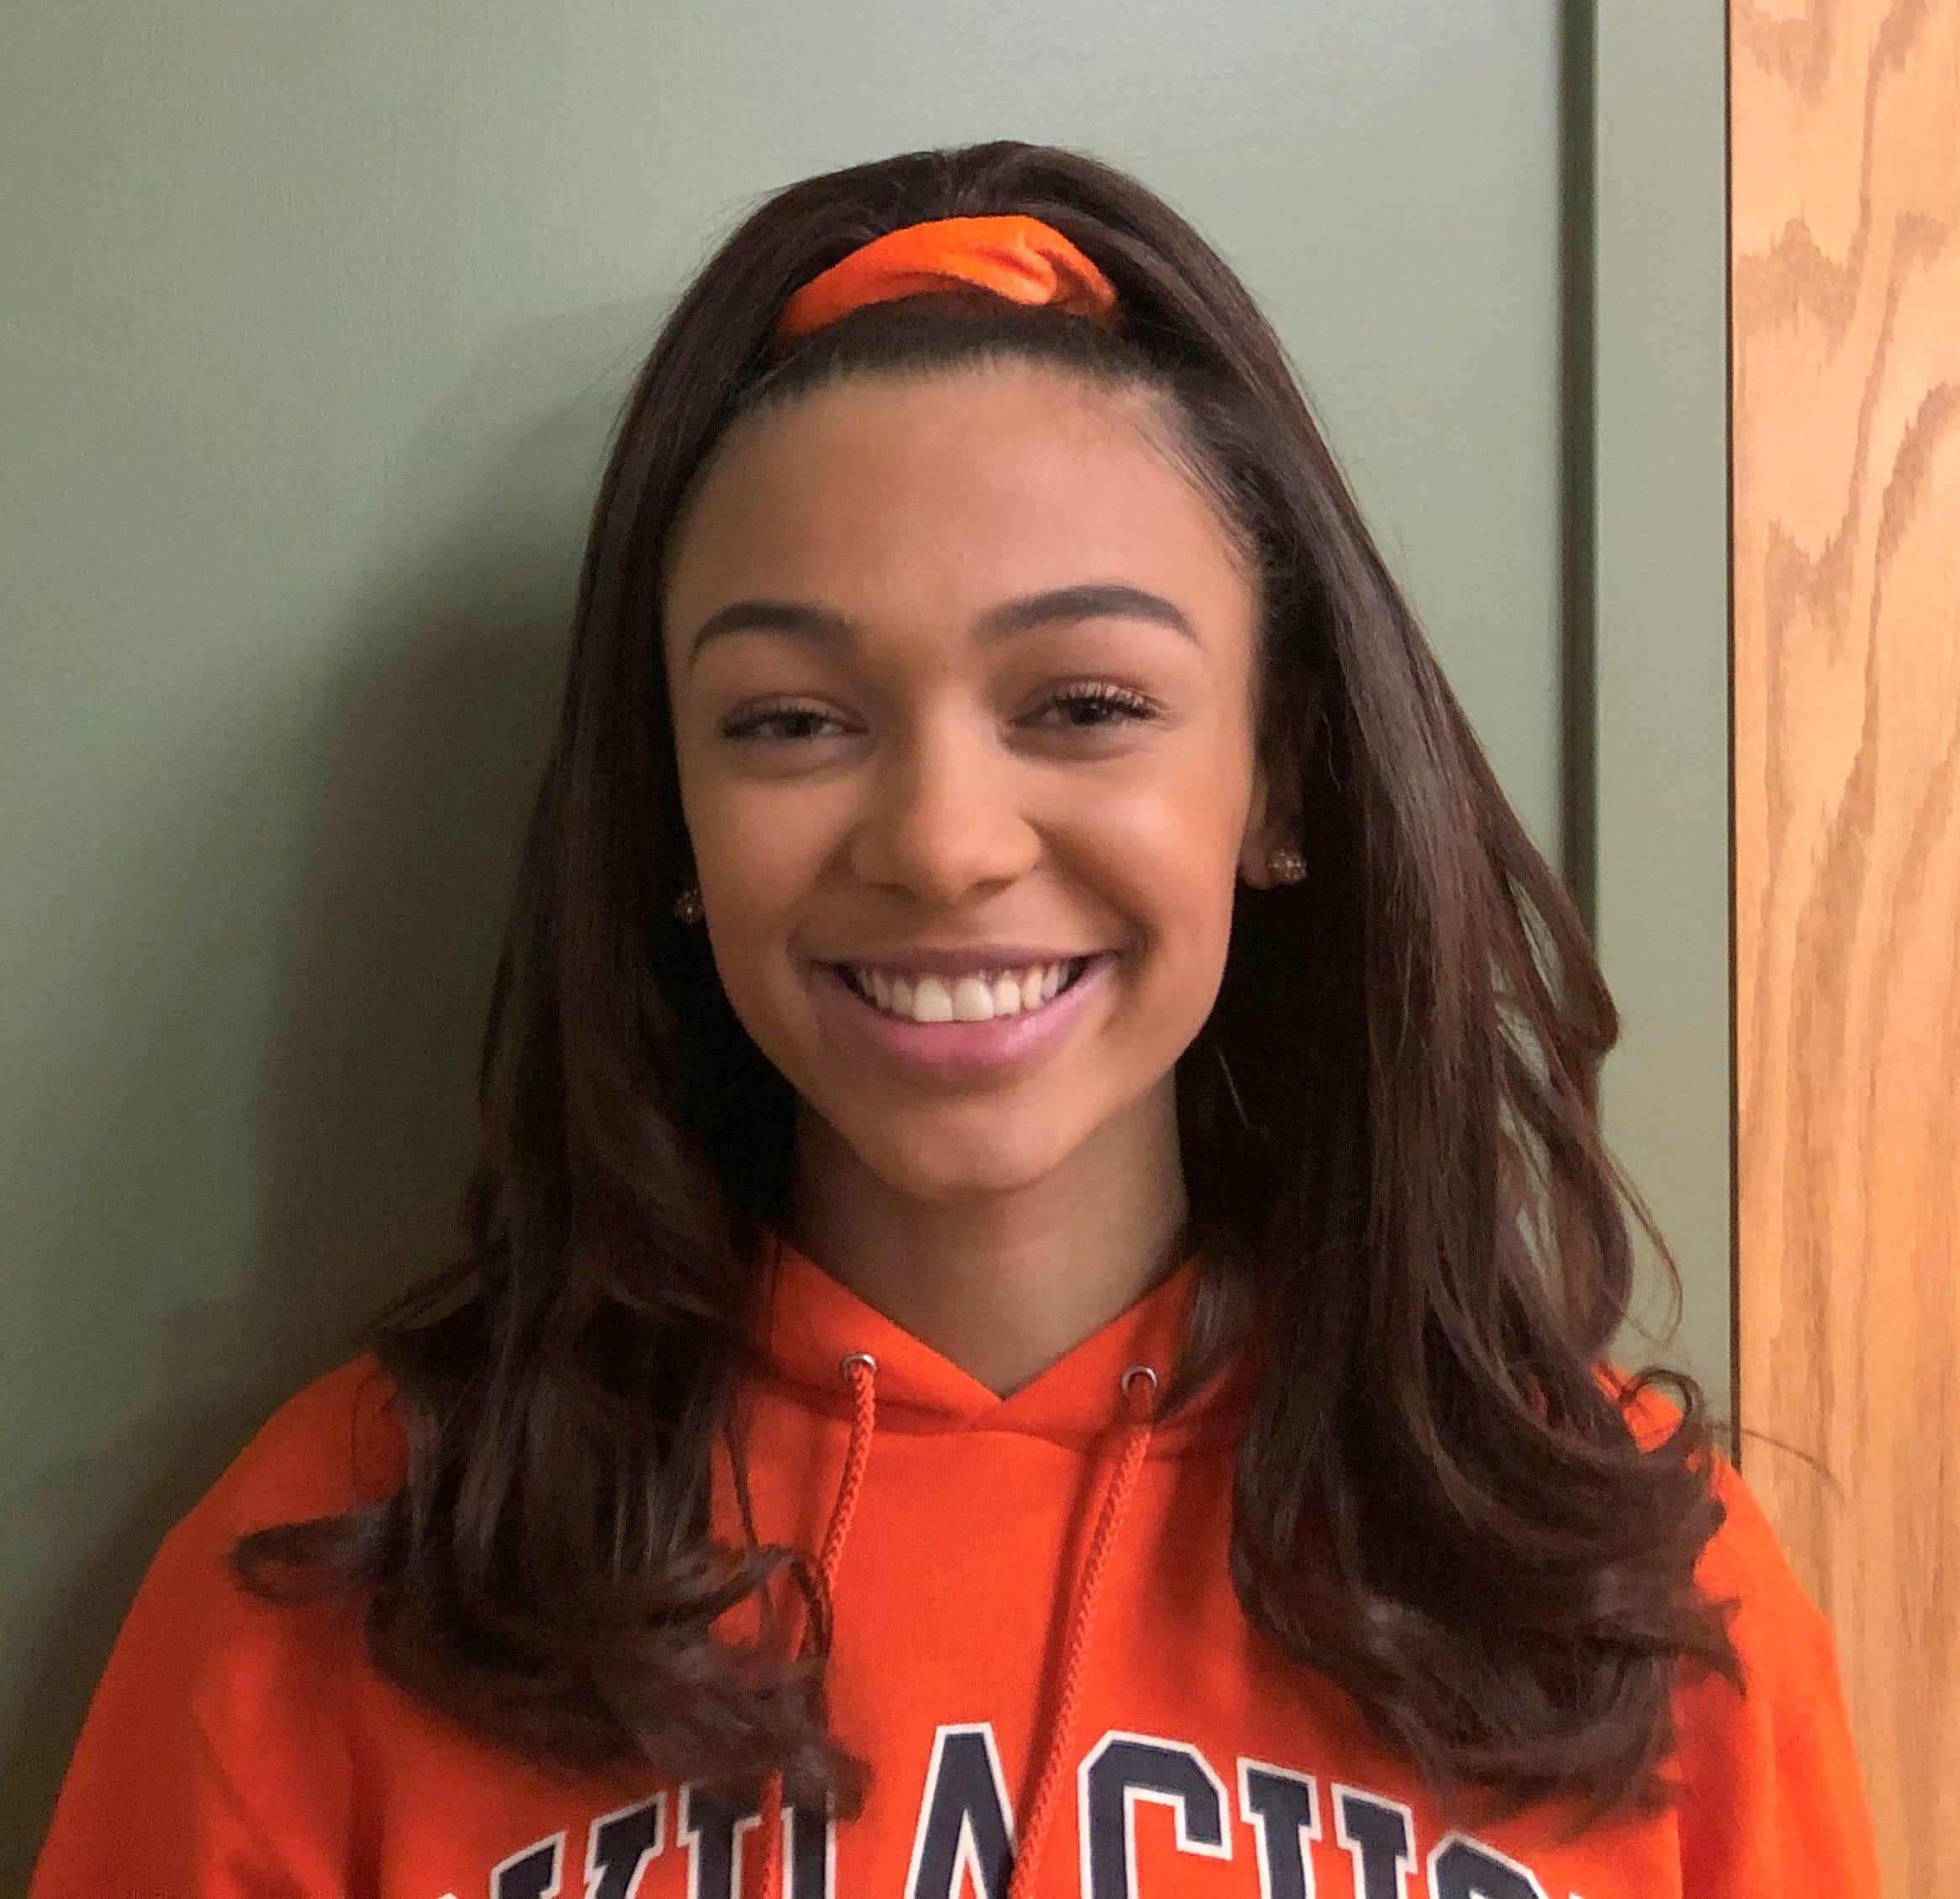 After tough year, Elmira's Kiara Fisher officially commits to Syracuse to play basketball - Star-Gazette